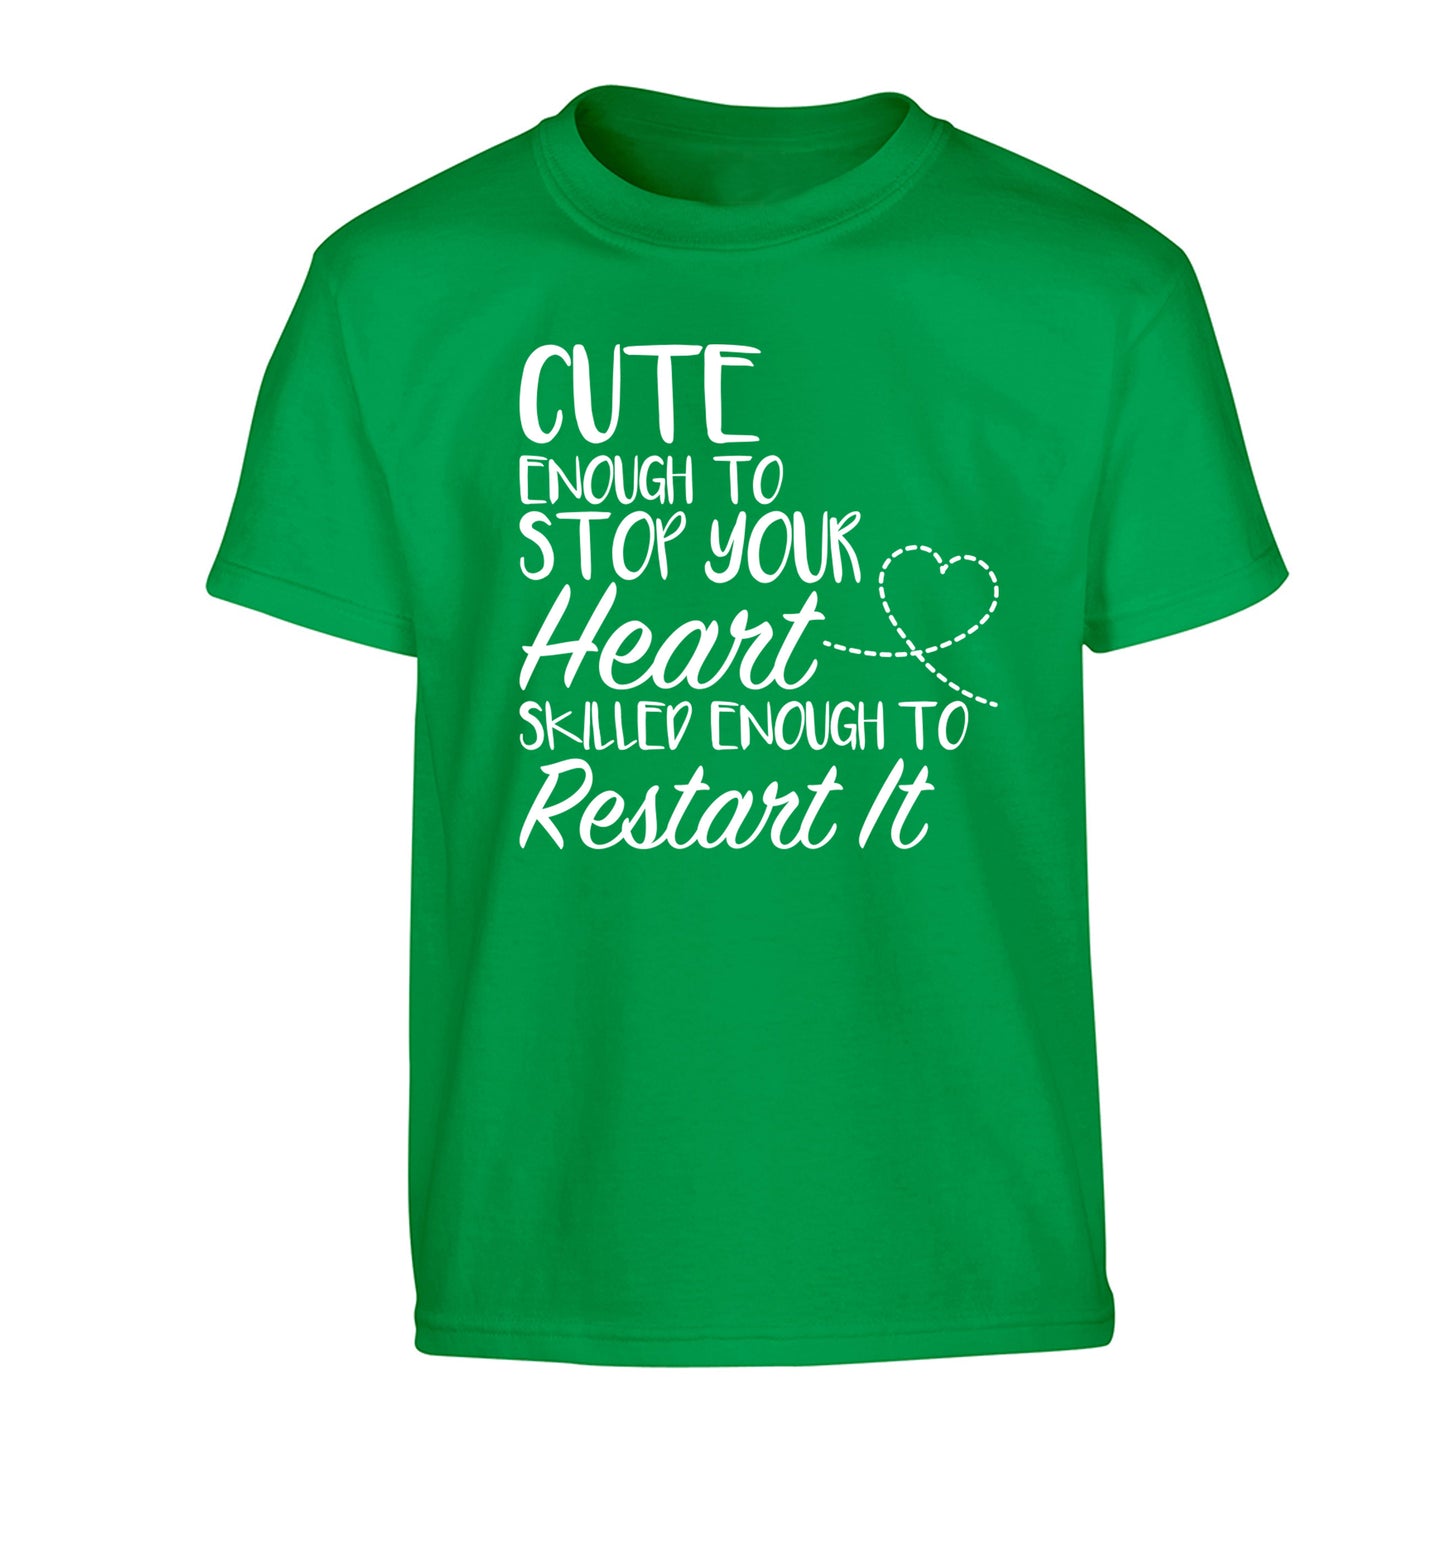 Cute enough to stop your heart skilled enough to restart it Children's green Tshirt 12-13 Years